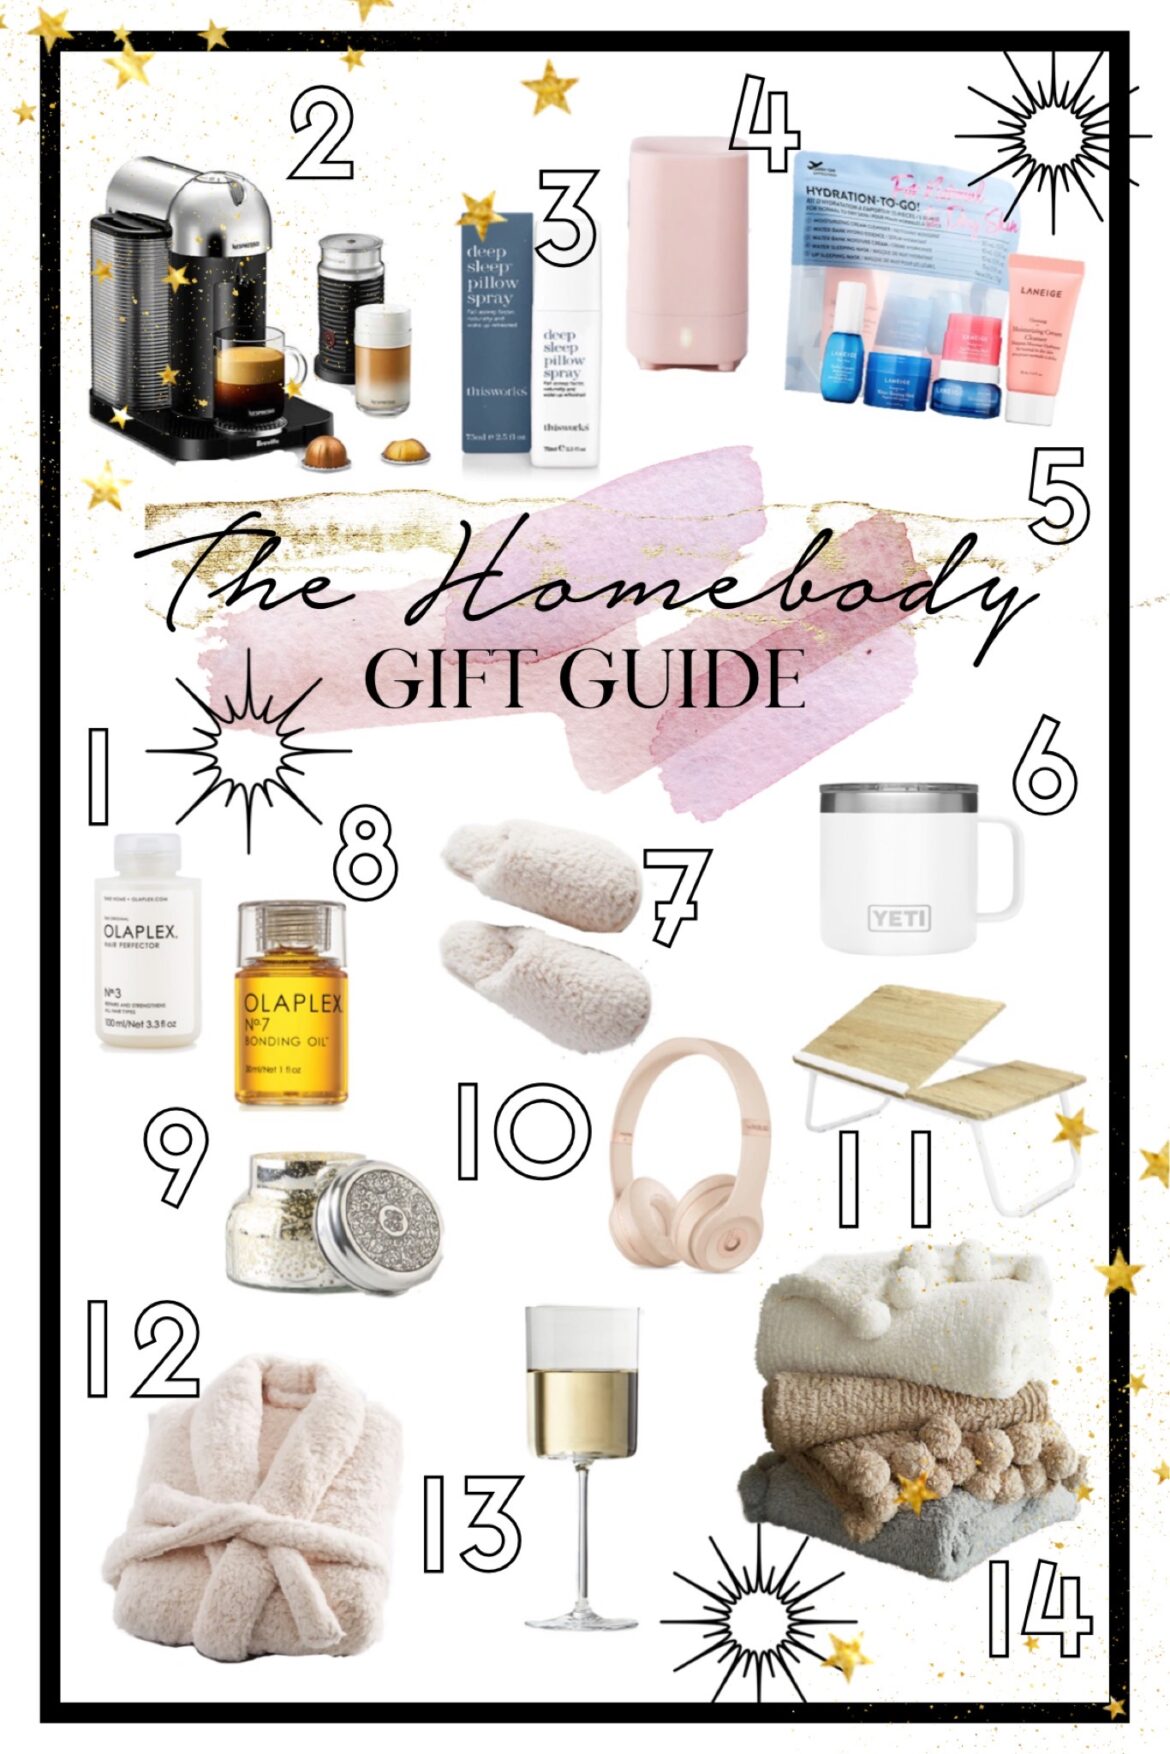 The Homebody 2019 Gift Guide